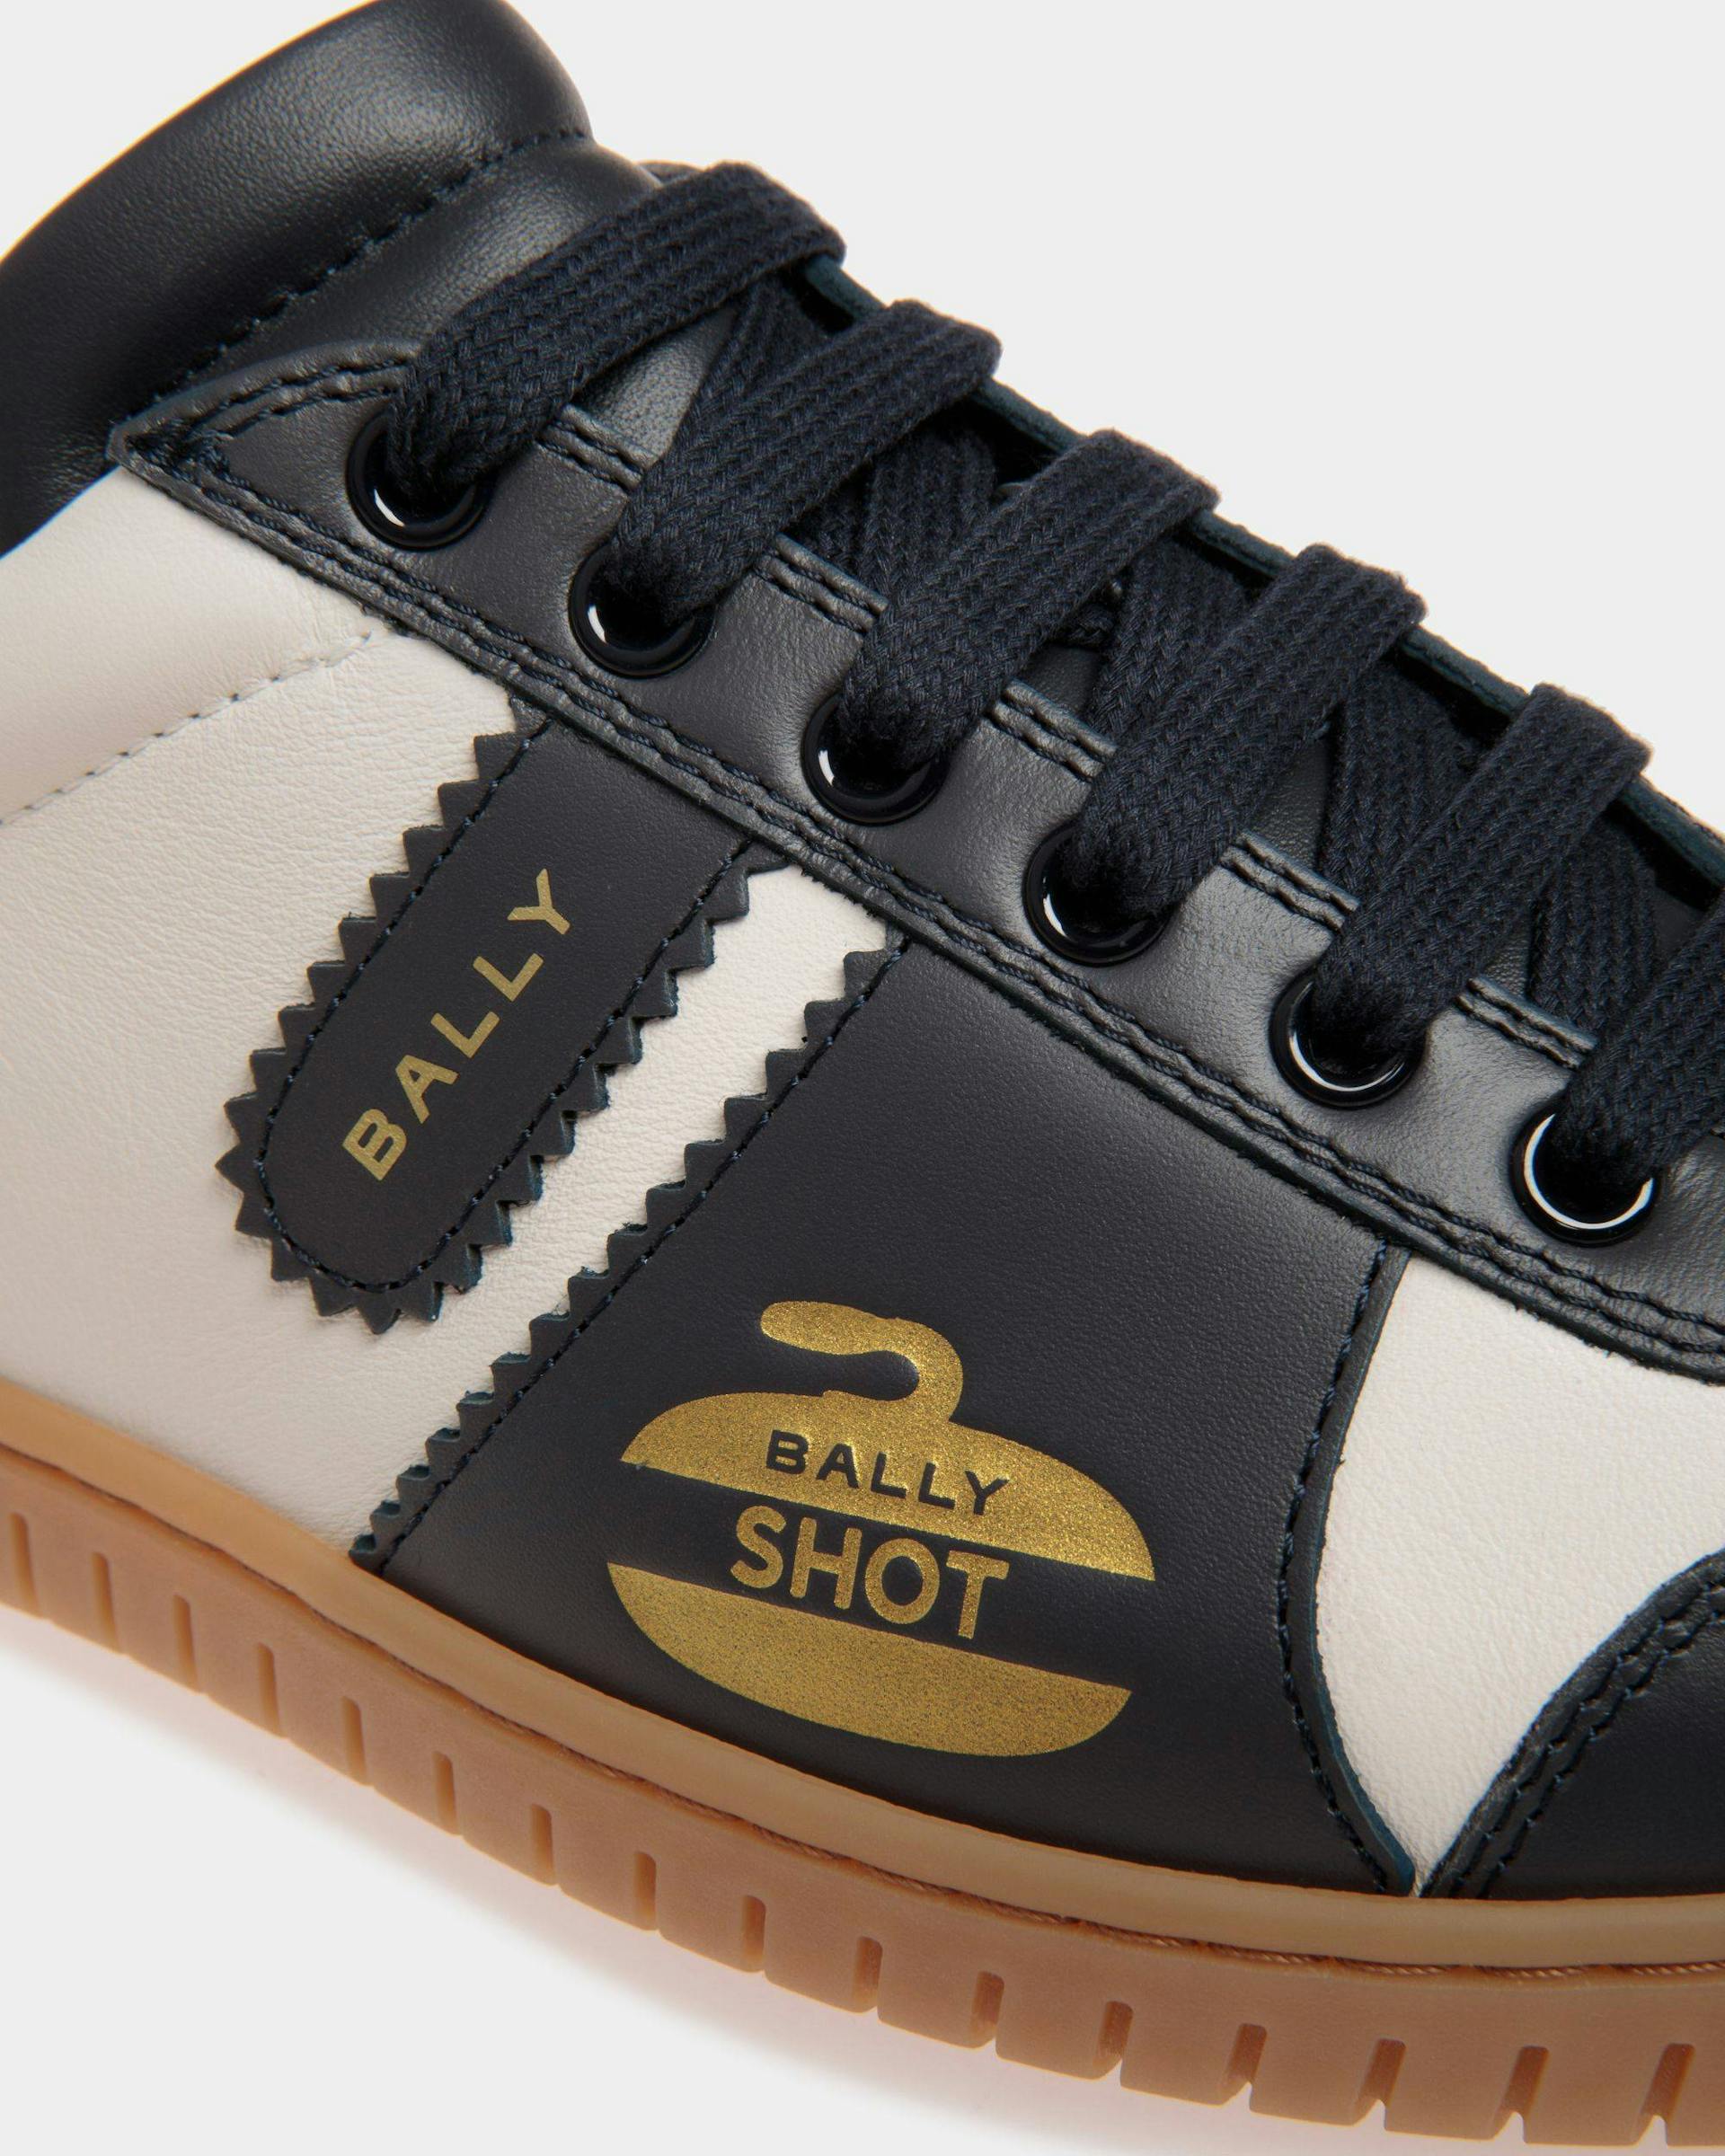 Men's Player Sneaker in Blue And White Leather | Bally | Still Life Detail